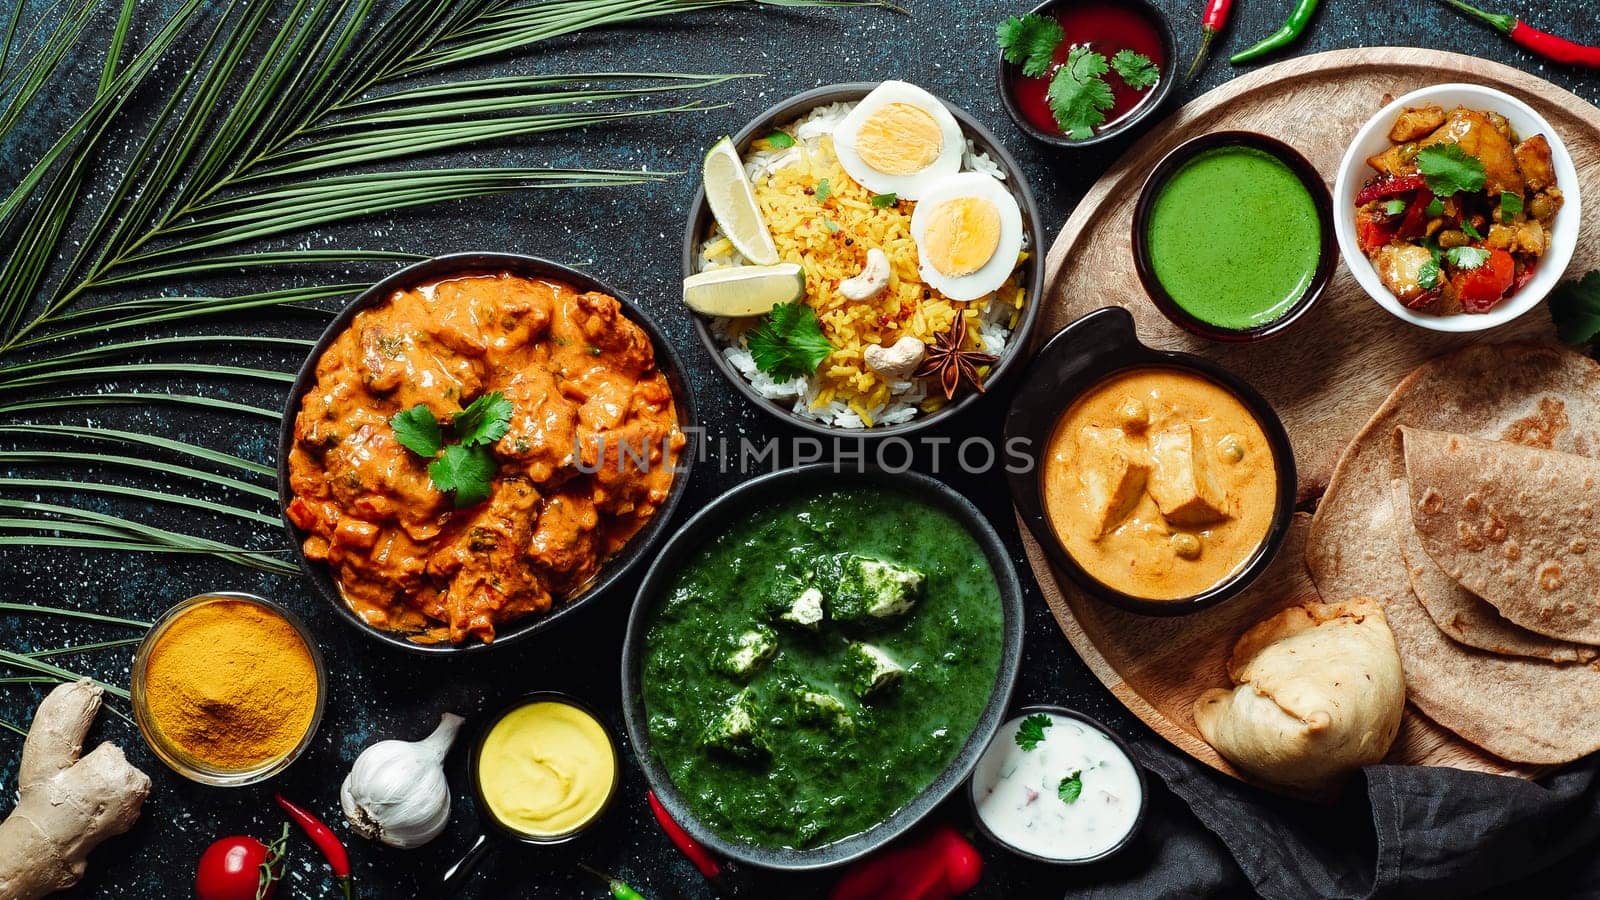 Indian cuisine dishes: tikka masala, paneer, samosa, chapati, chutney, spices. Indian food on dark background. Assortment indian meal top view or flat lay. Copy space for text.